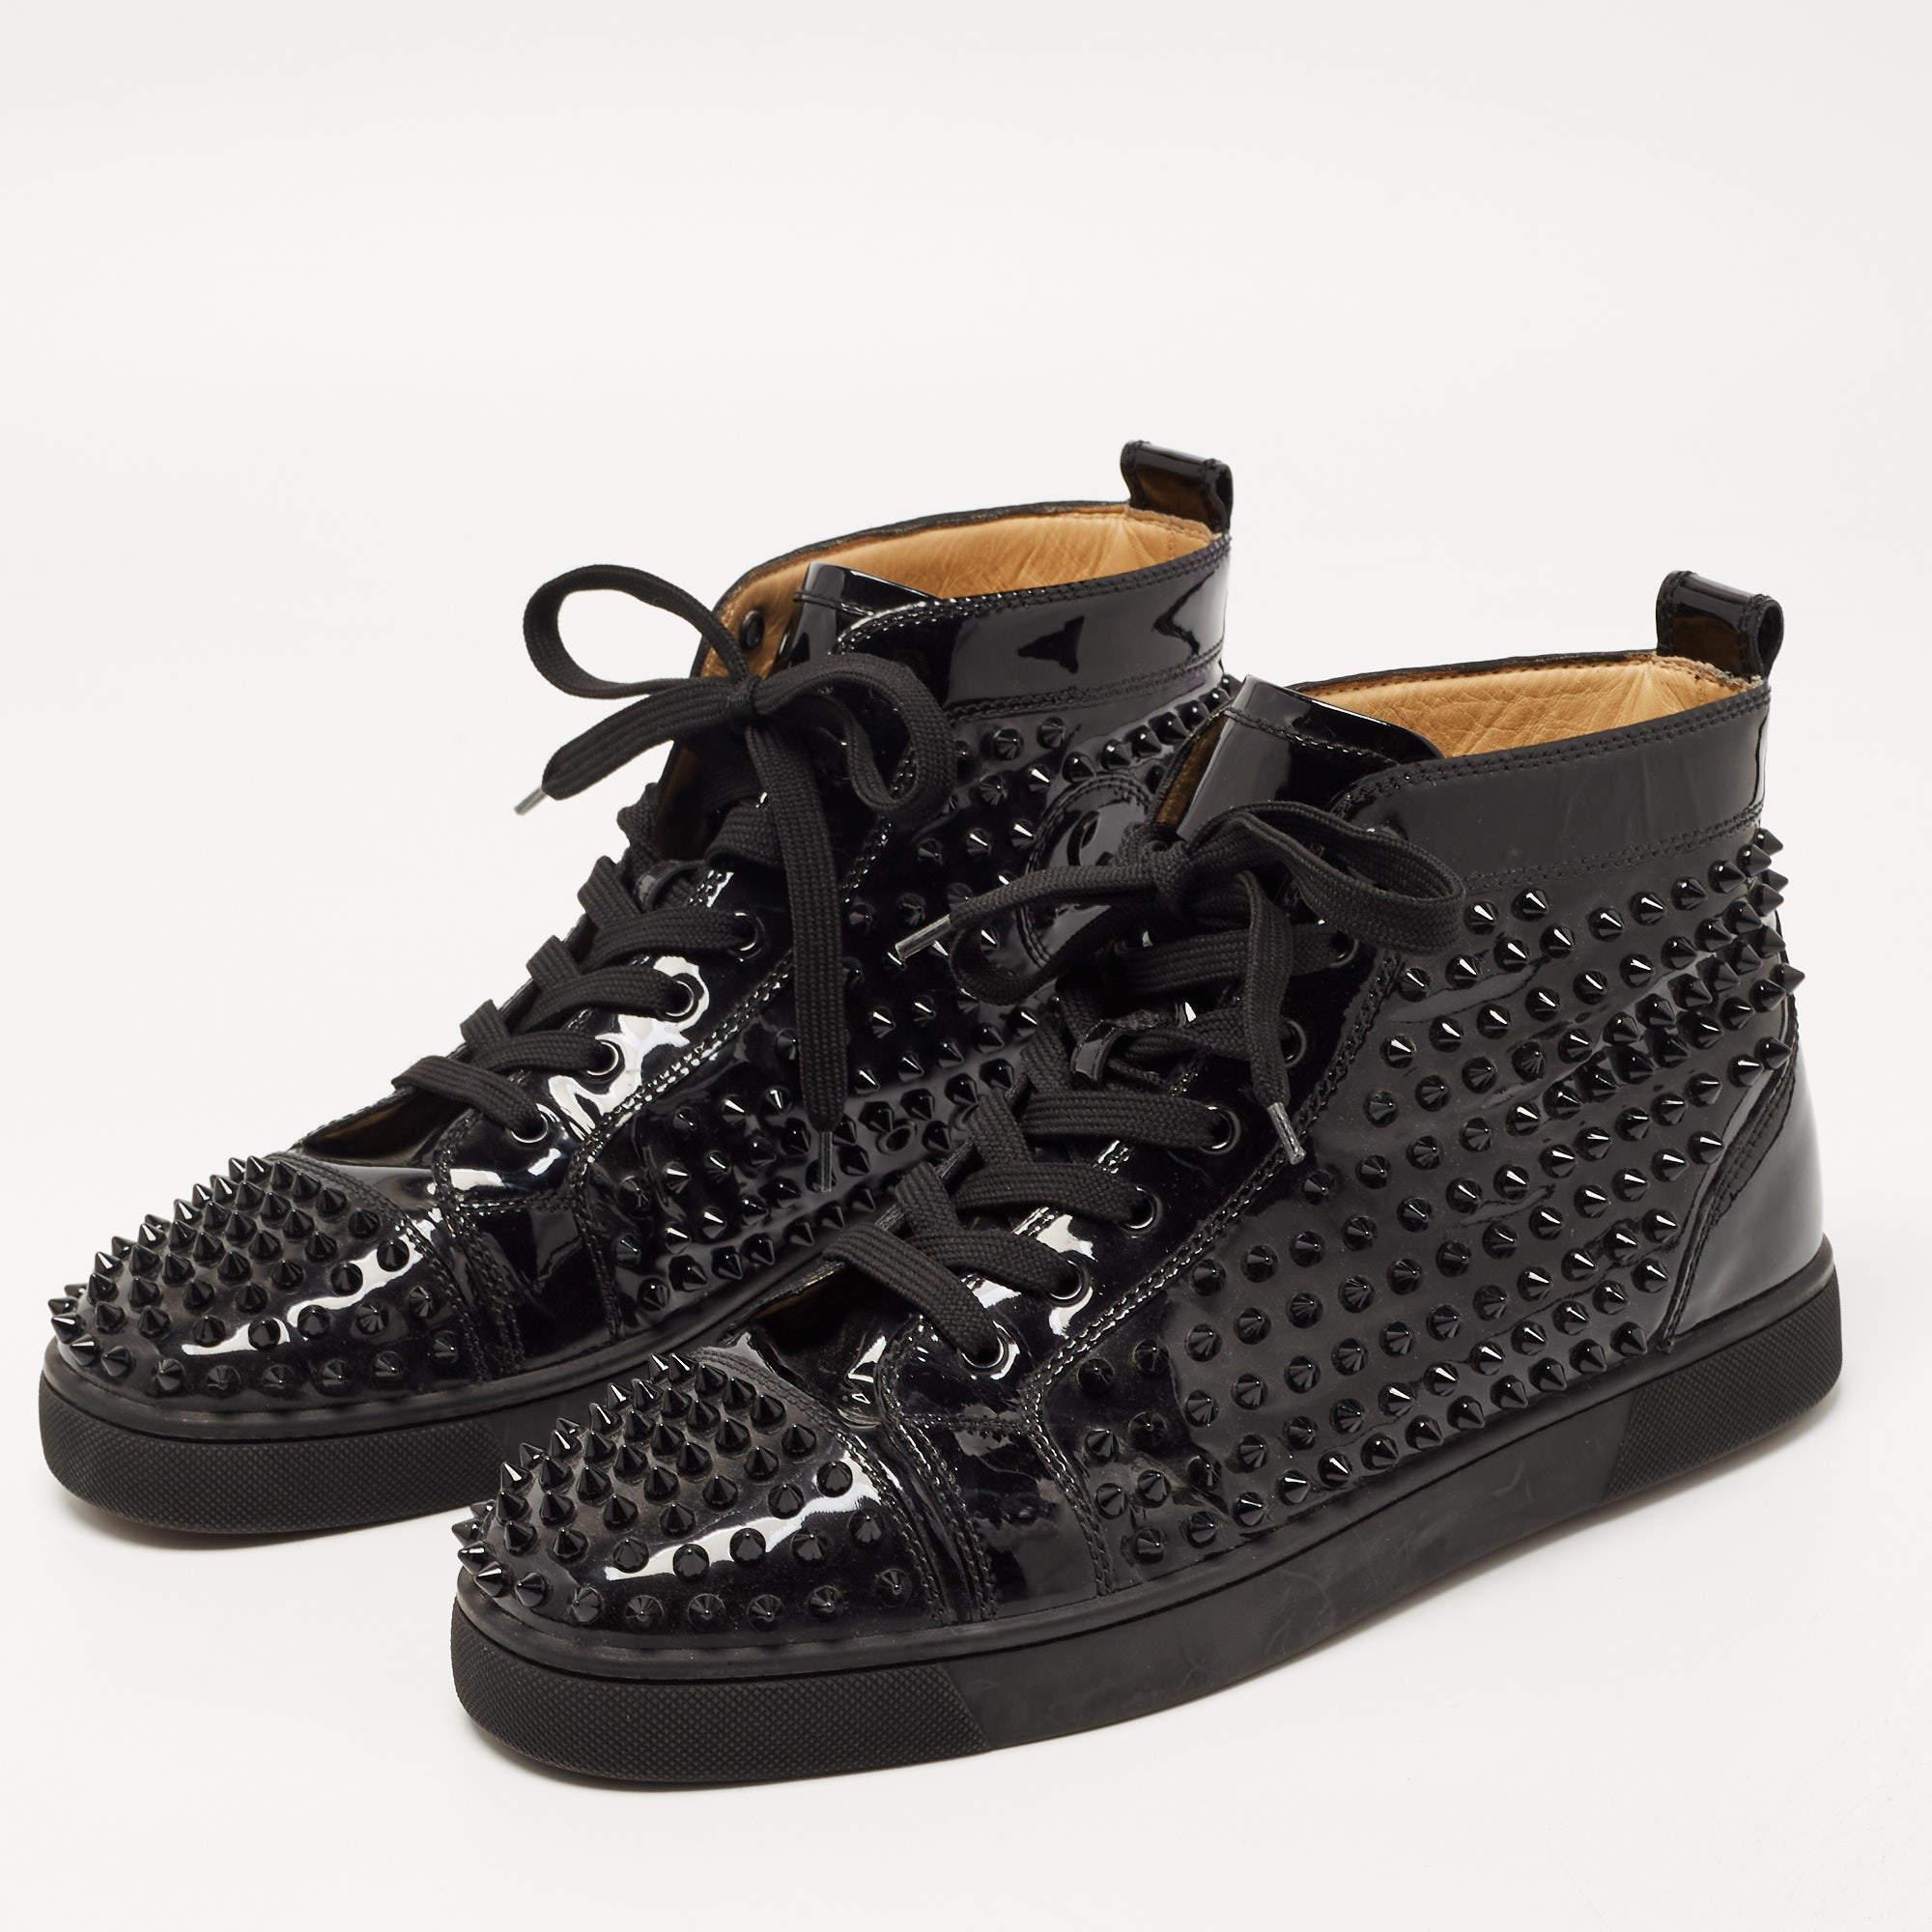 Christian Louboutin Black Patent Leather Louis Spikes High Top Sneakers Size 43. 3